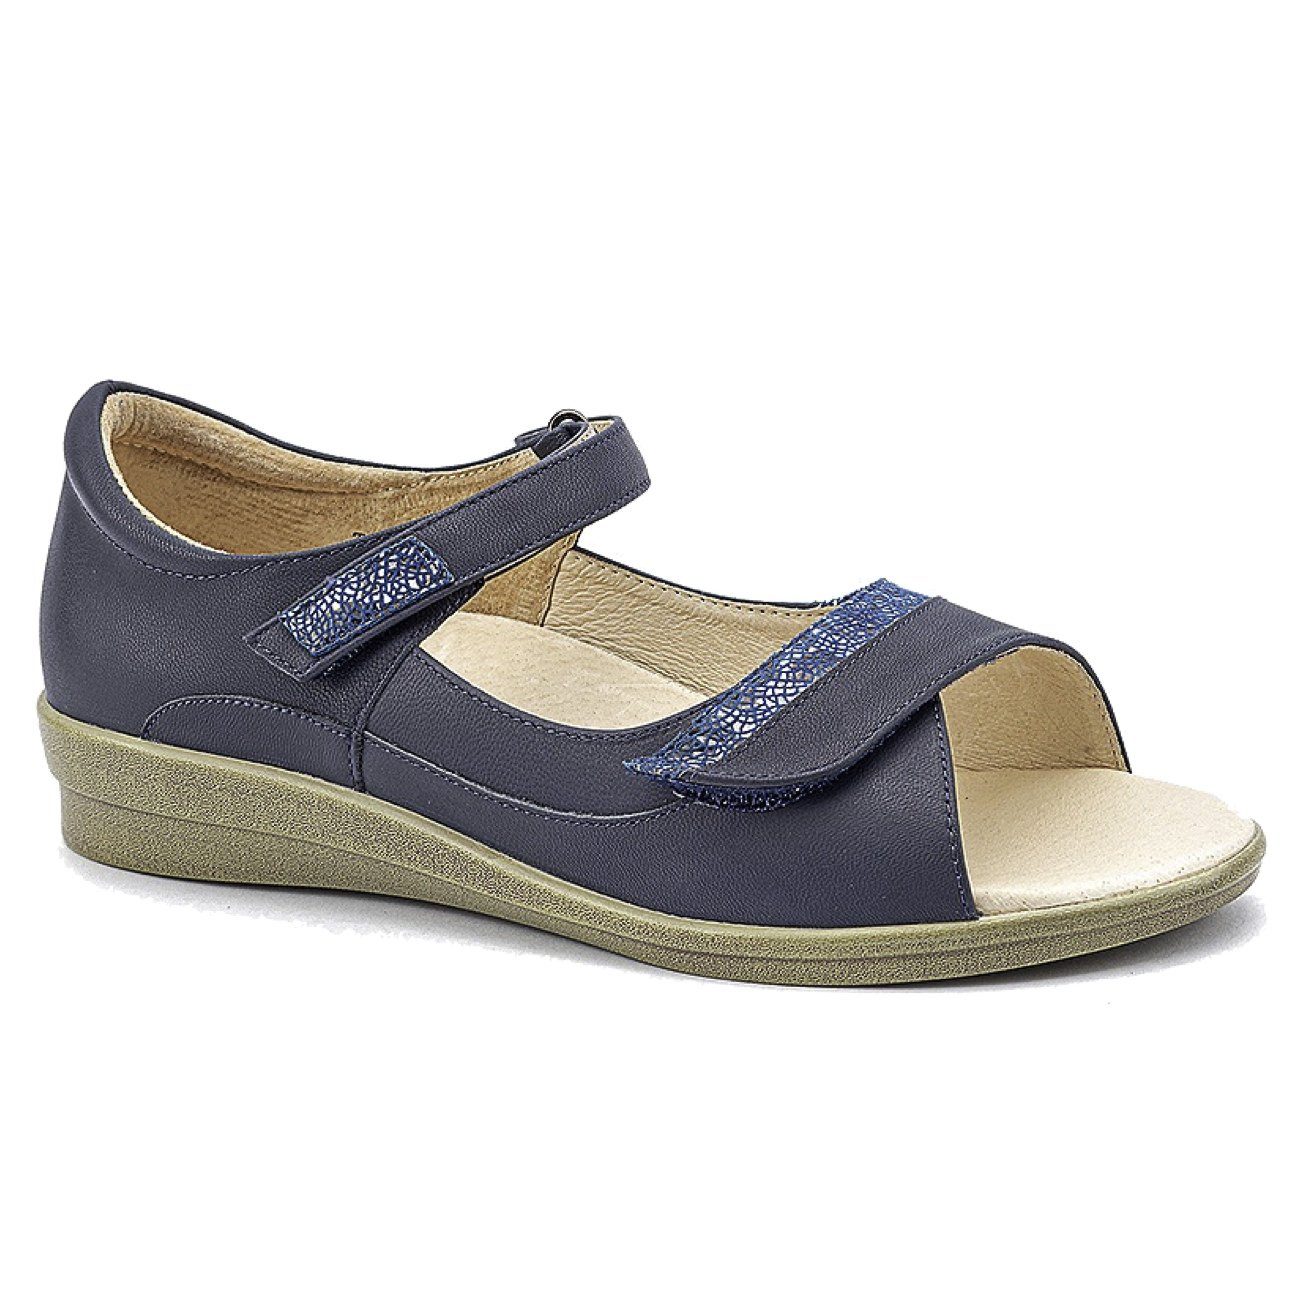 Klouds, Tracy, Sandal, Leather, Navy Combo Sandals Klouds Navy Combo 37 